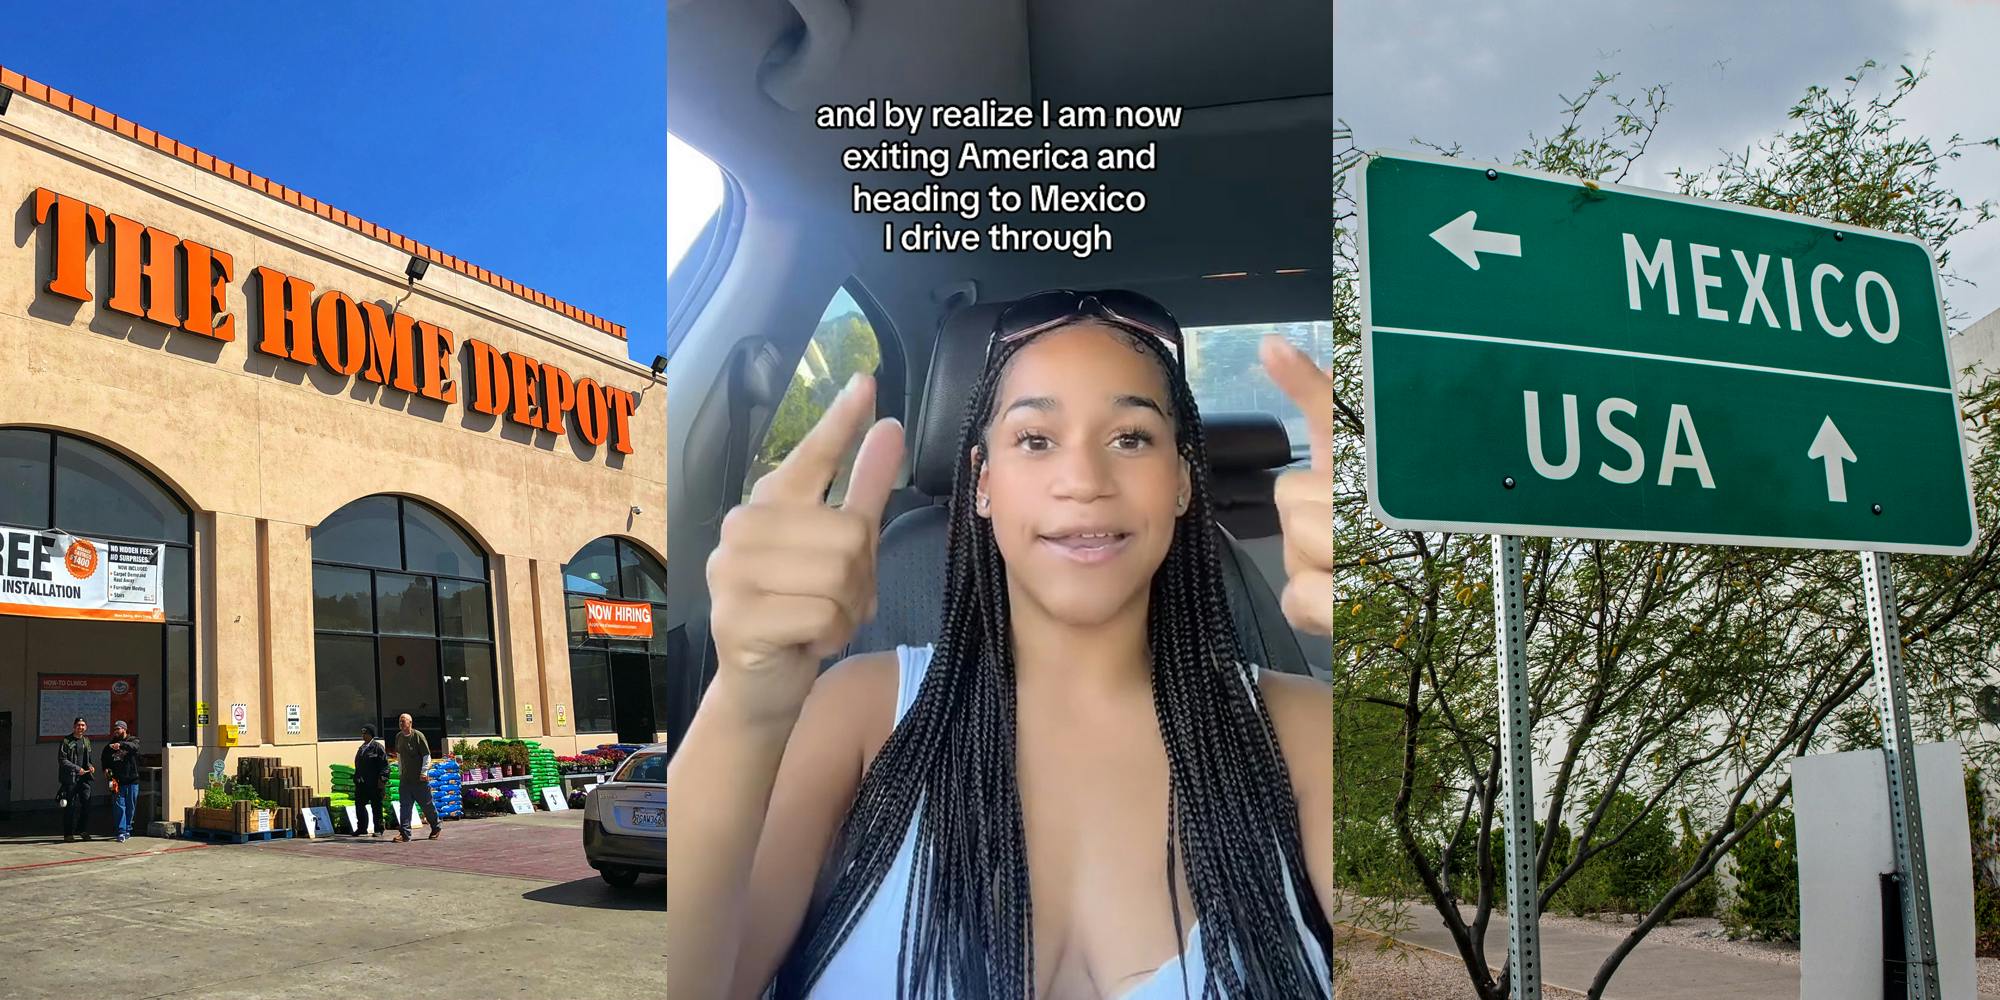 Home Depot building with sign (l) woman speaking in car with caption "and by realize I am now exiting America and heading to Mexico I drive through" (c) Mexico USA directions on sign (r)